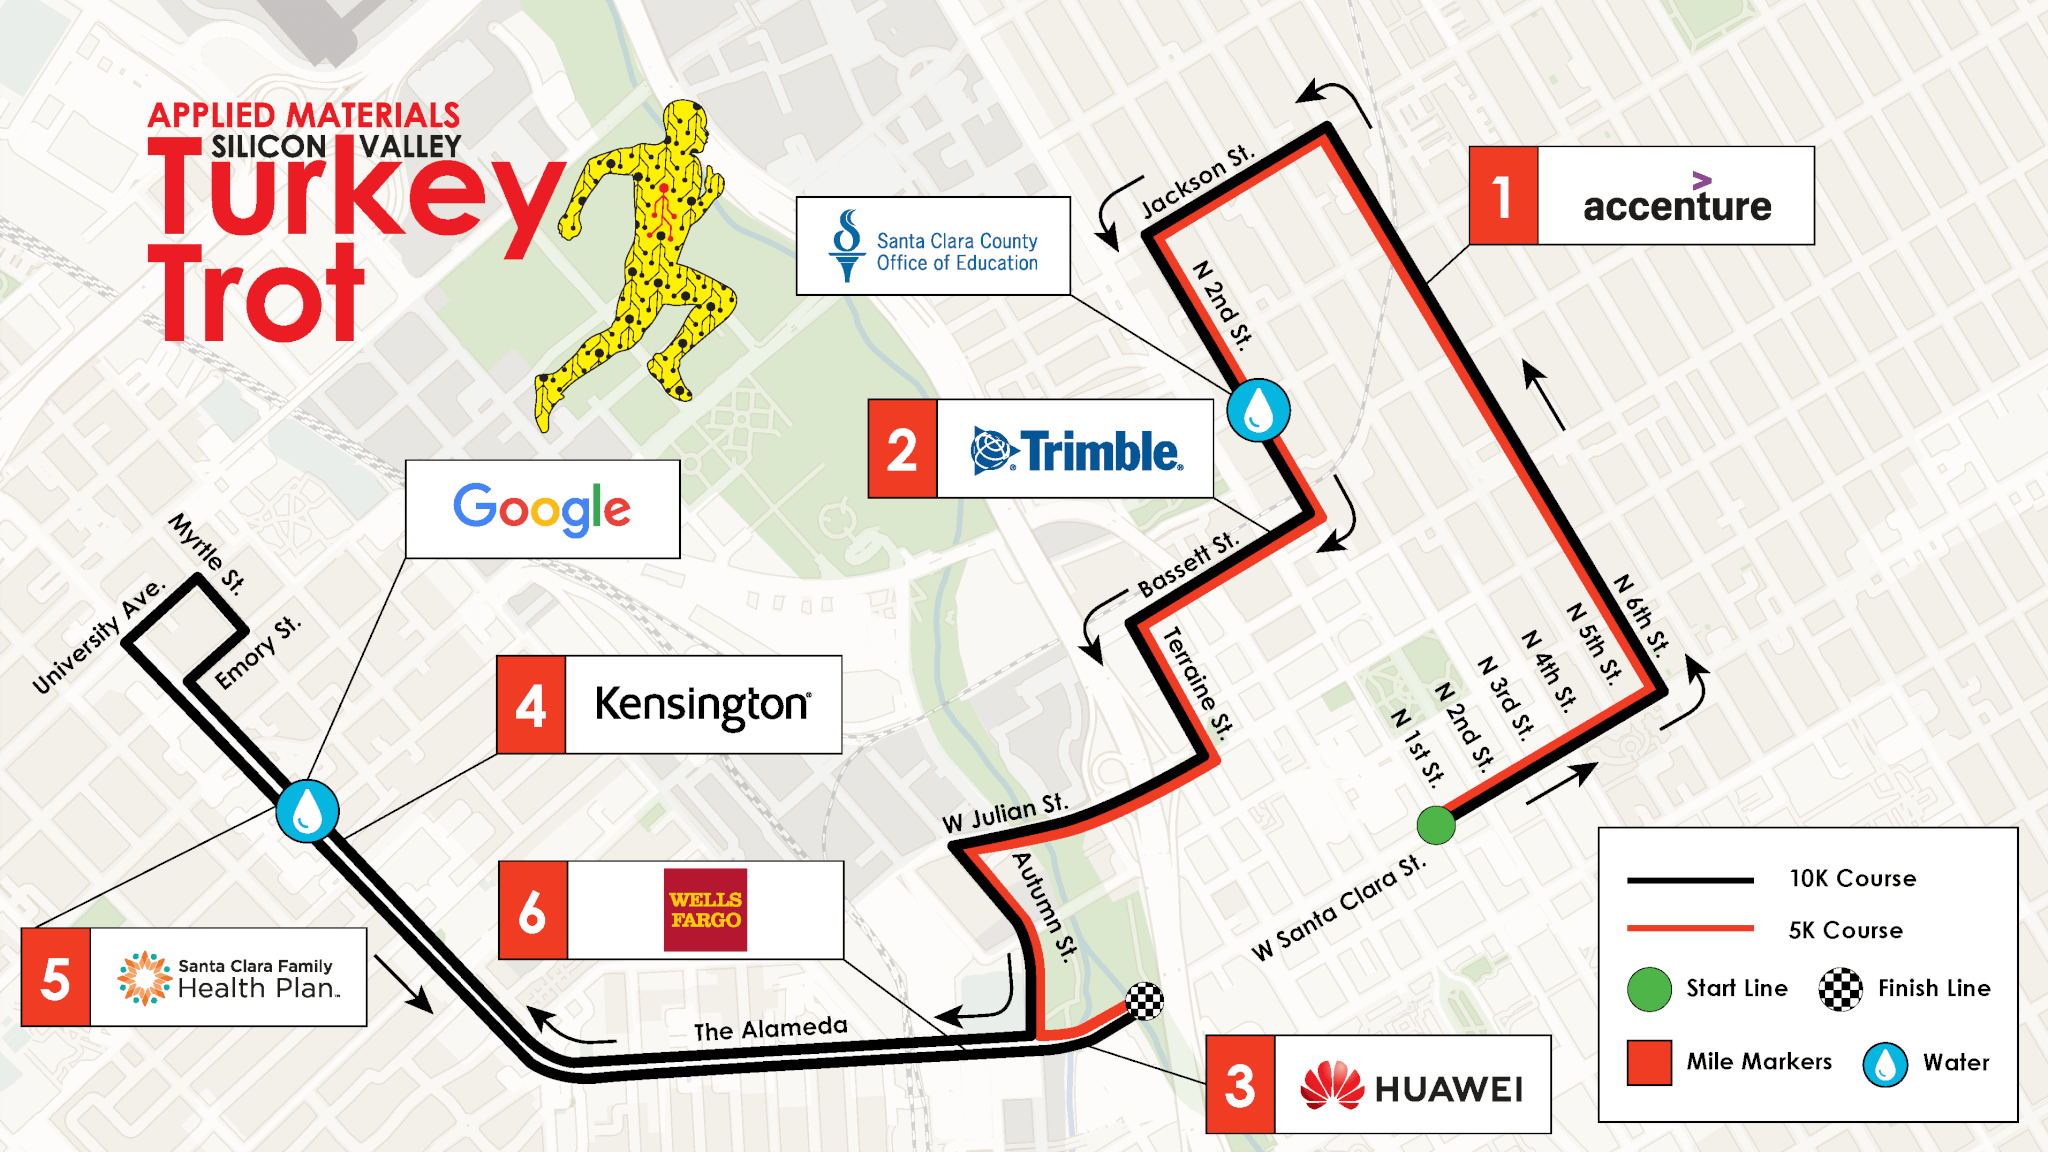 Silicon Valley Turkey Trot Course Map